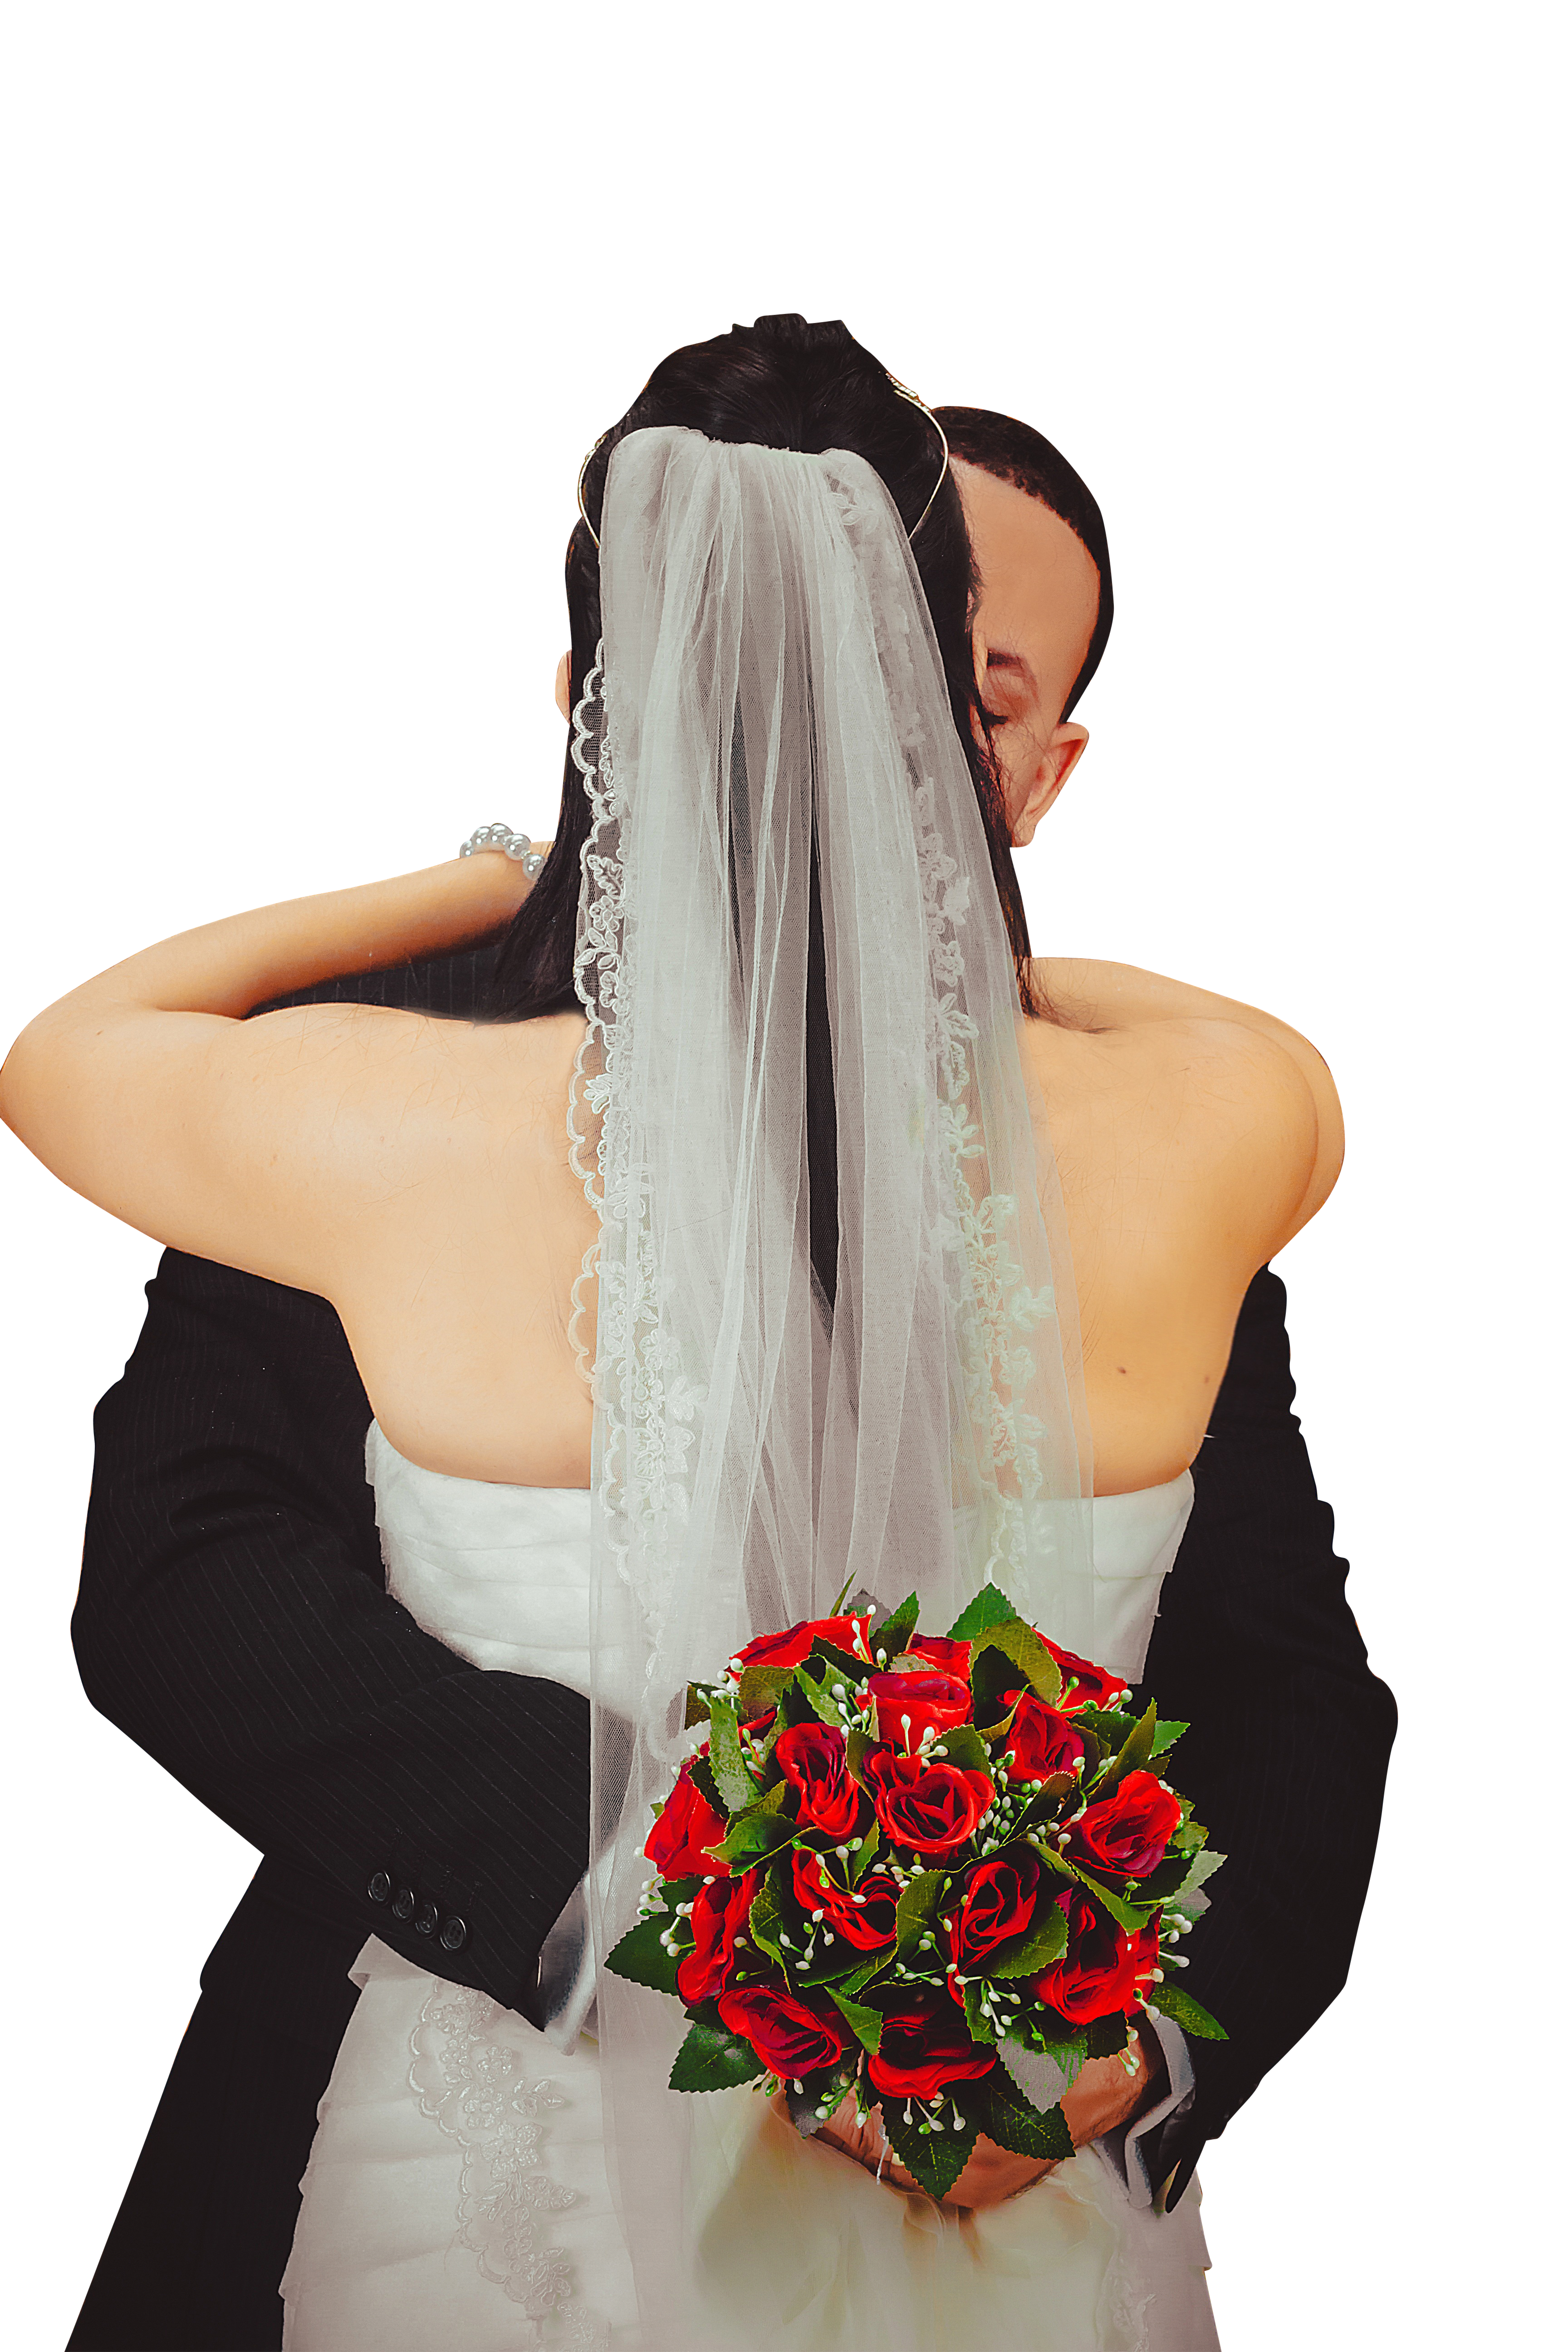 A Bride And Groom Hugging